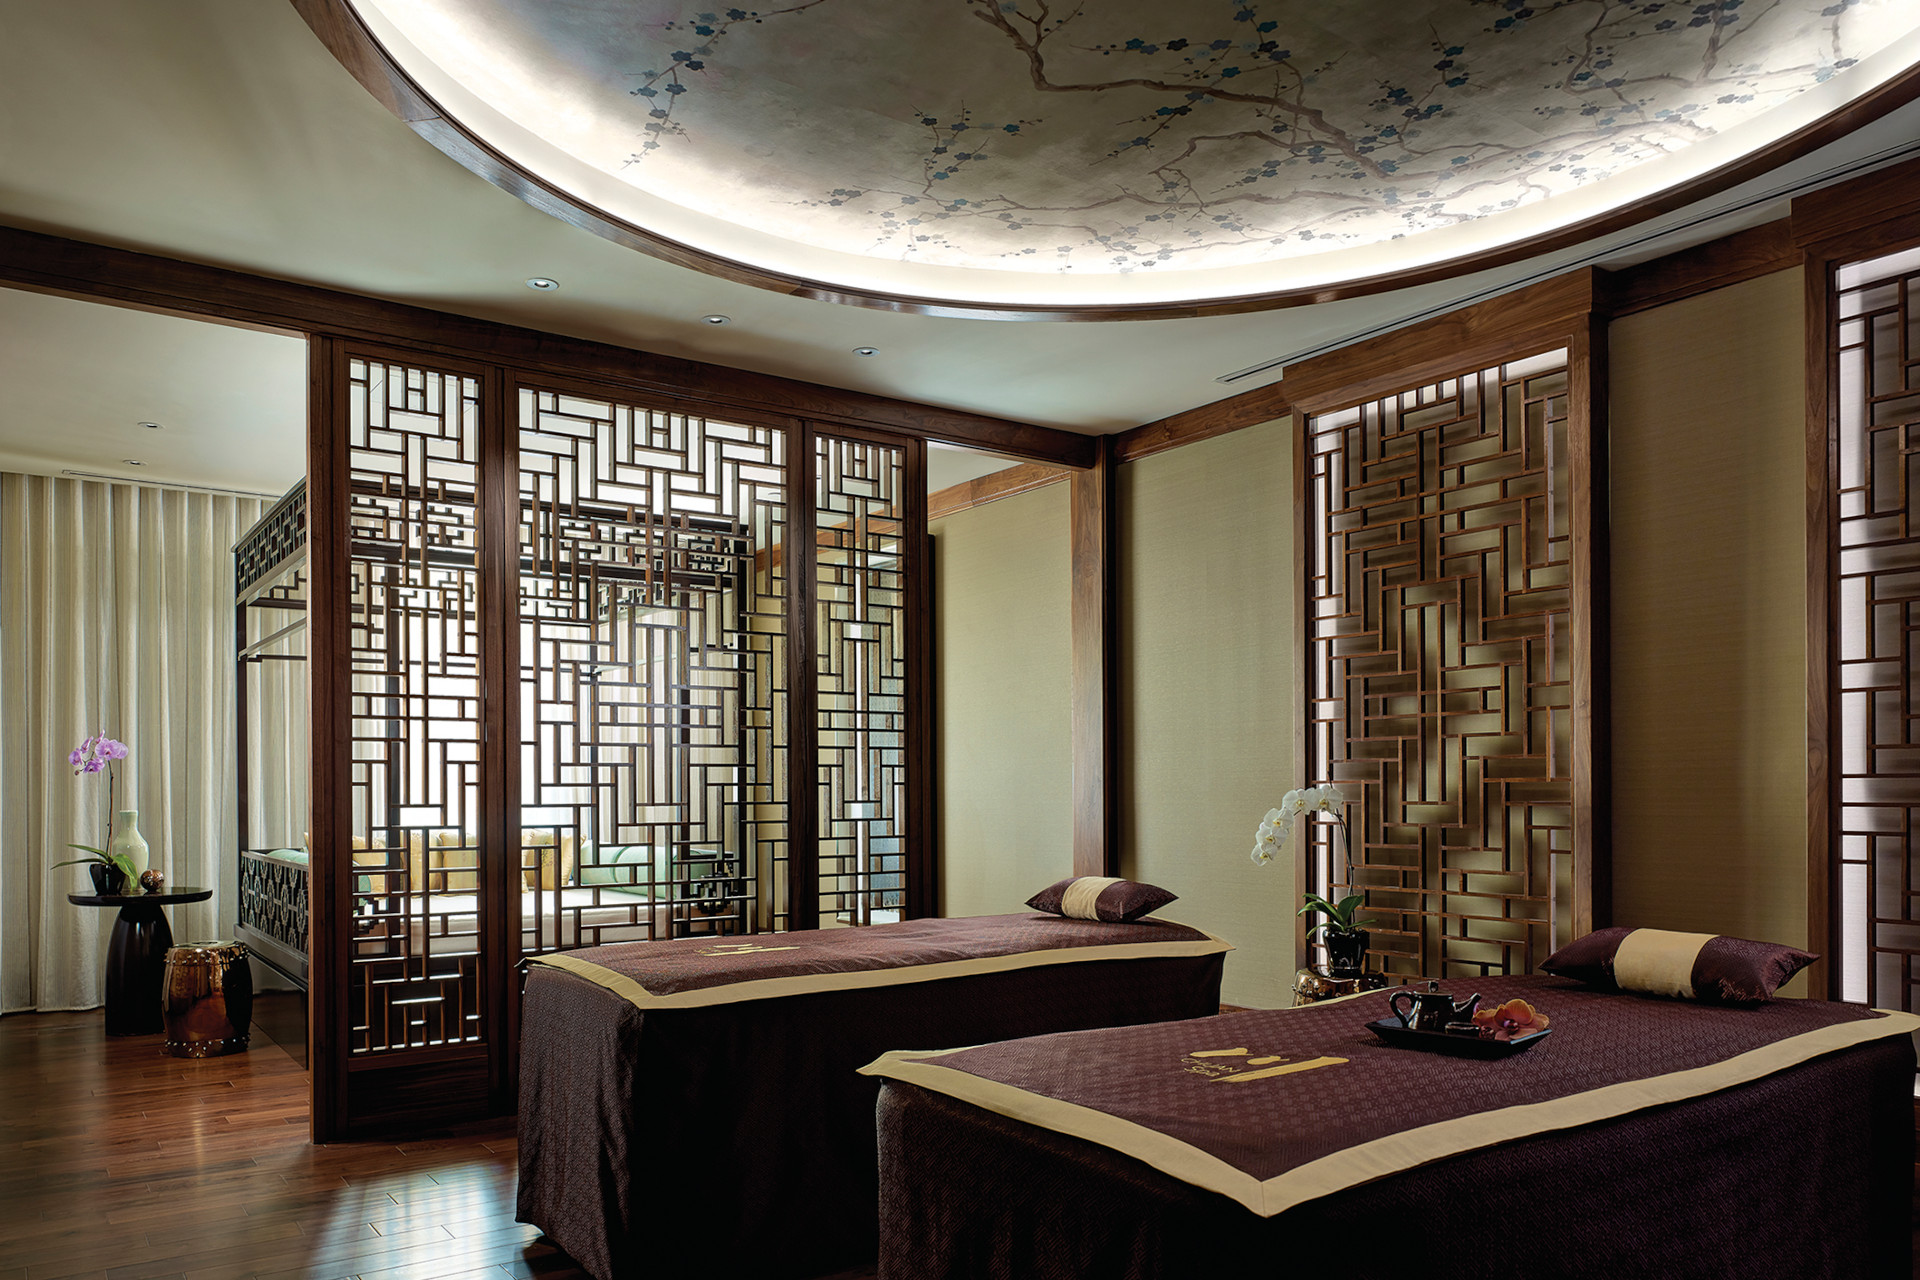 Treatment room at a spa with asian-inspired decor